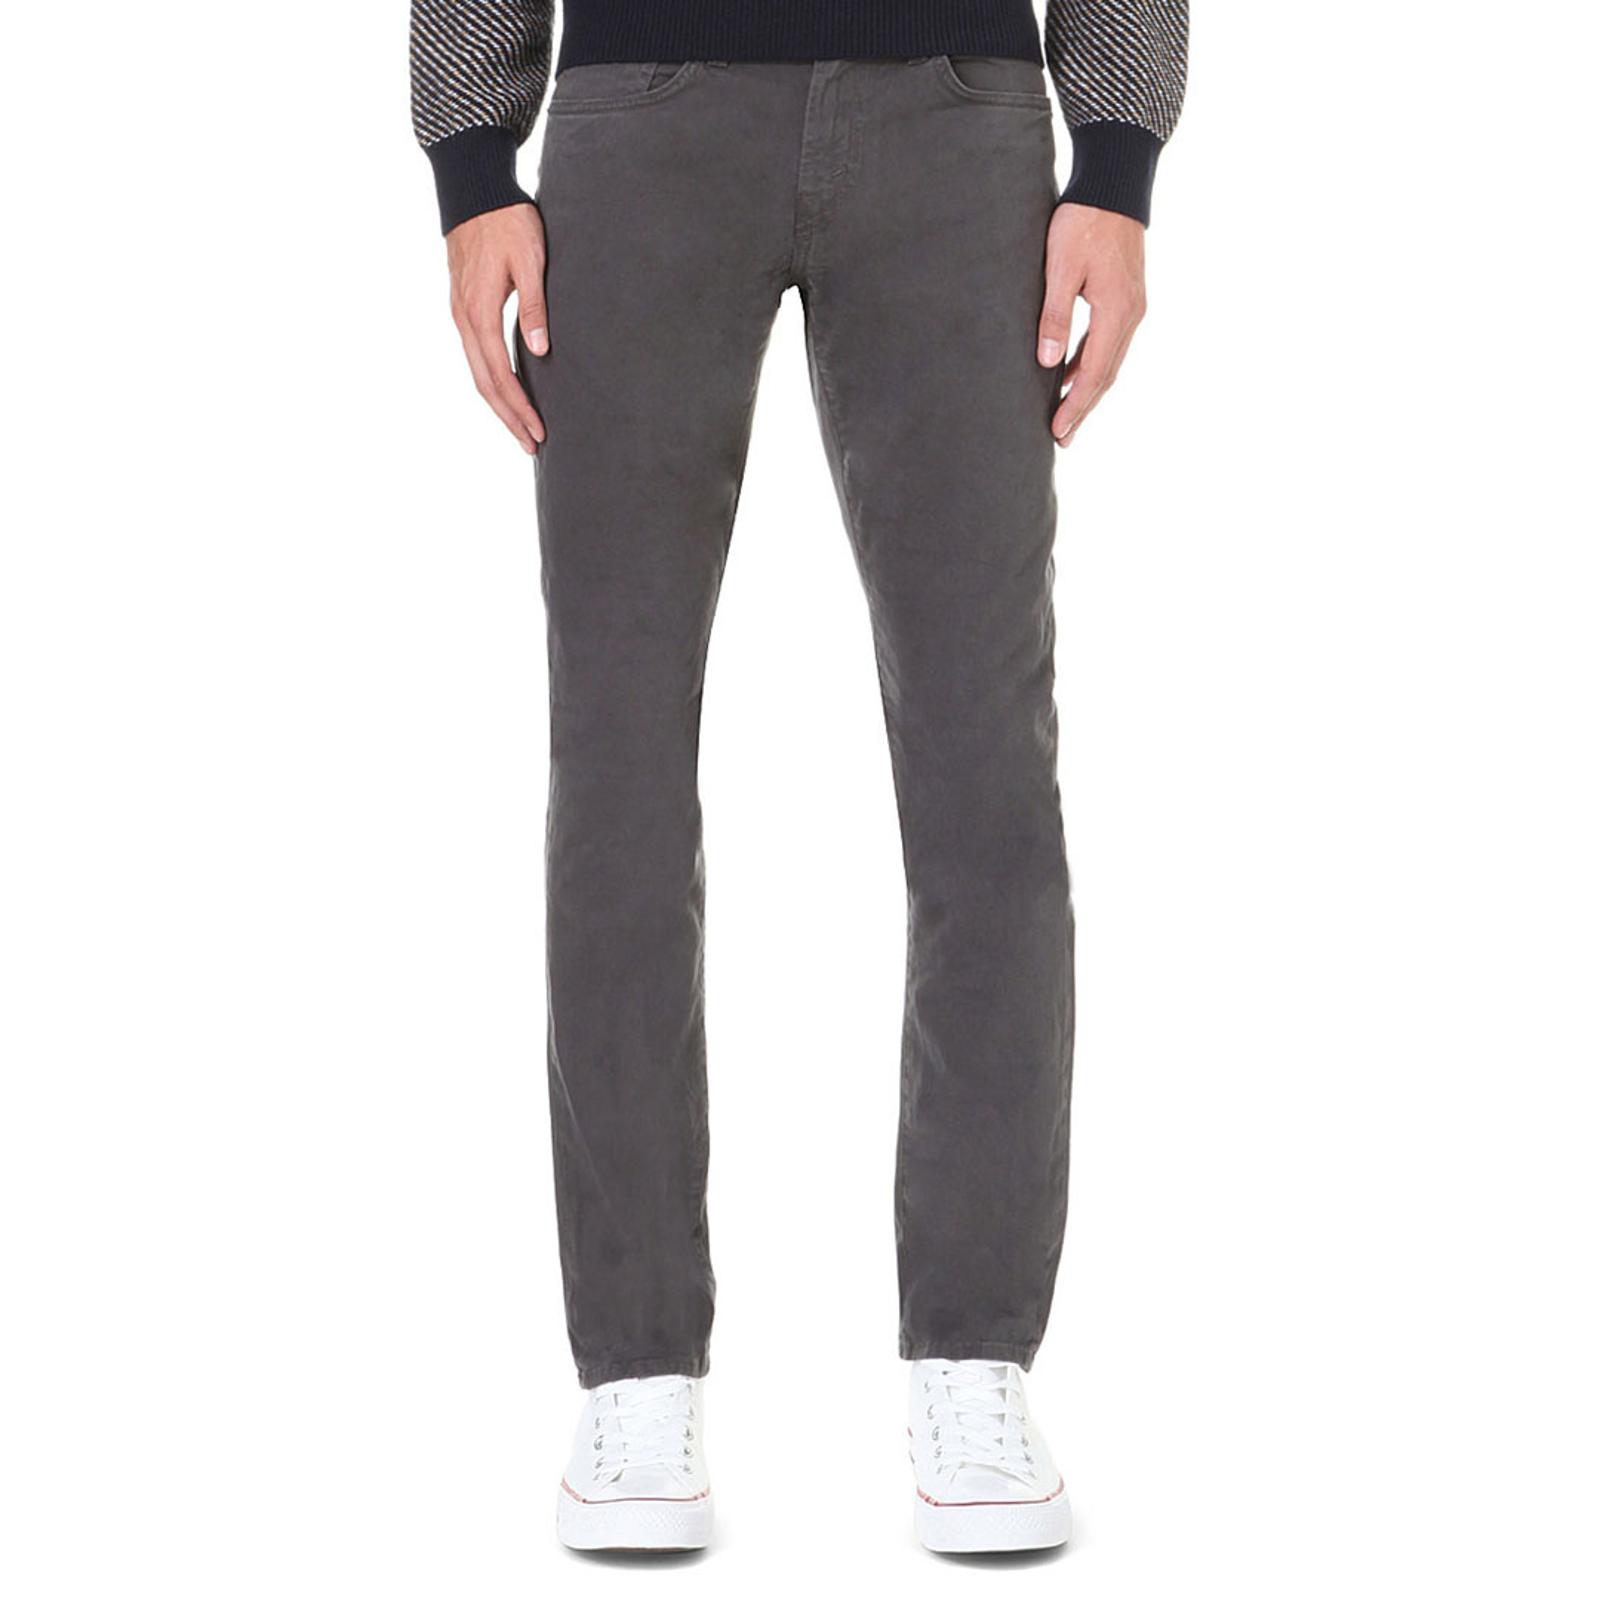 Charcoal Kane Straight Stretch Jeans - BrandAlley